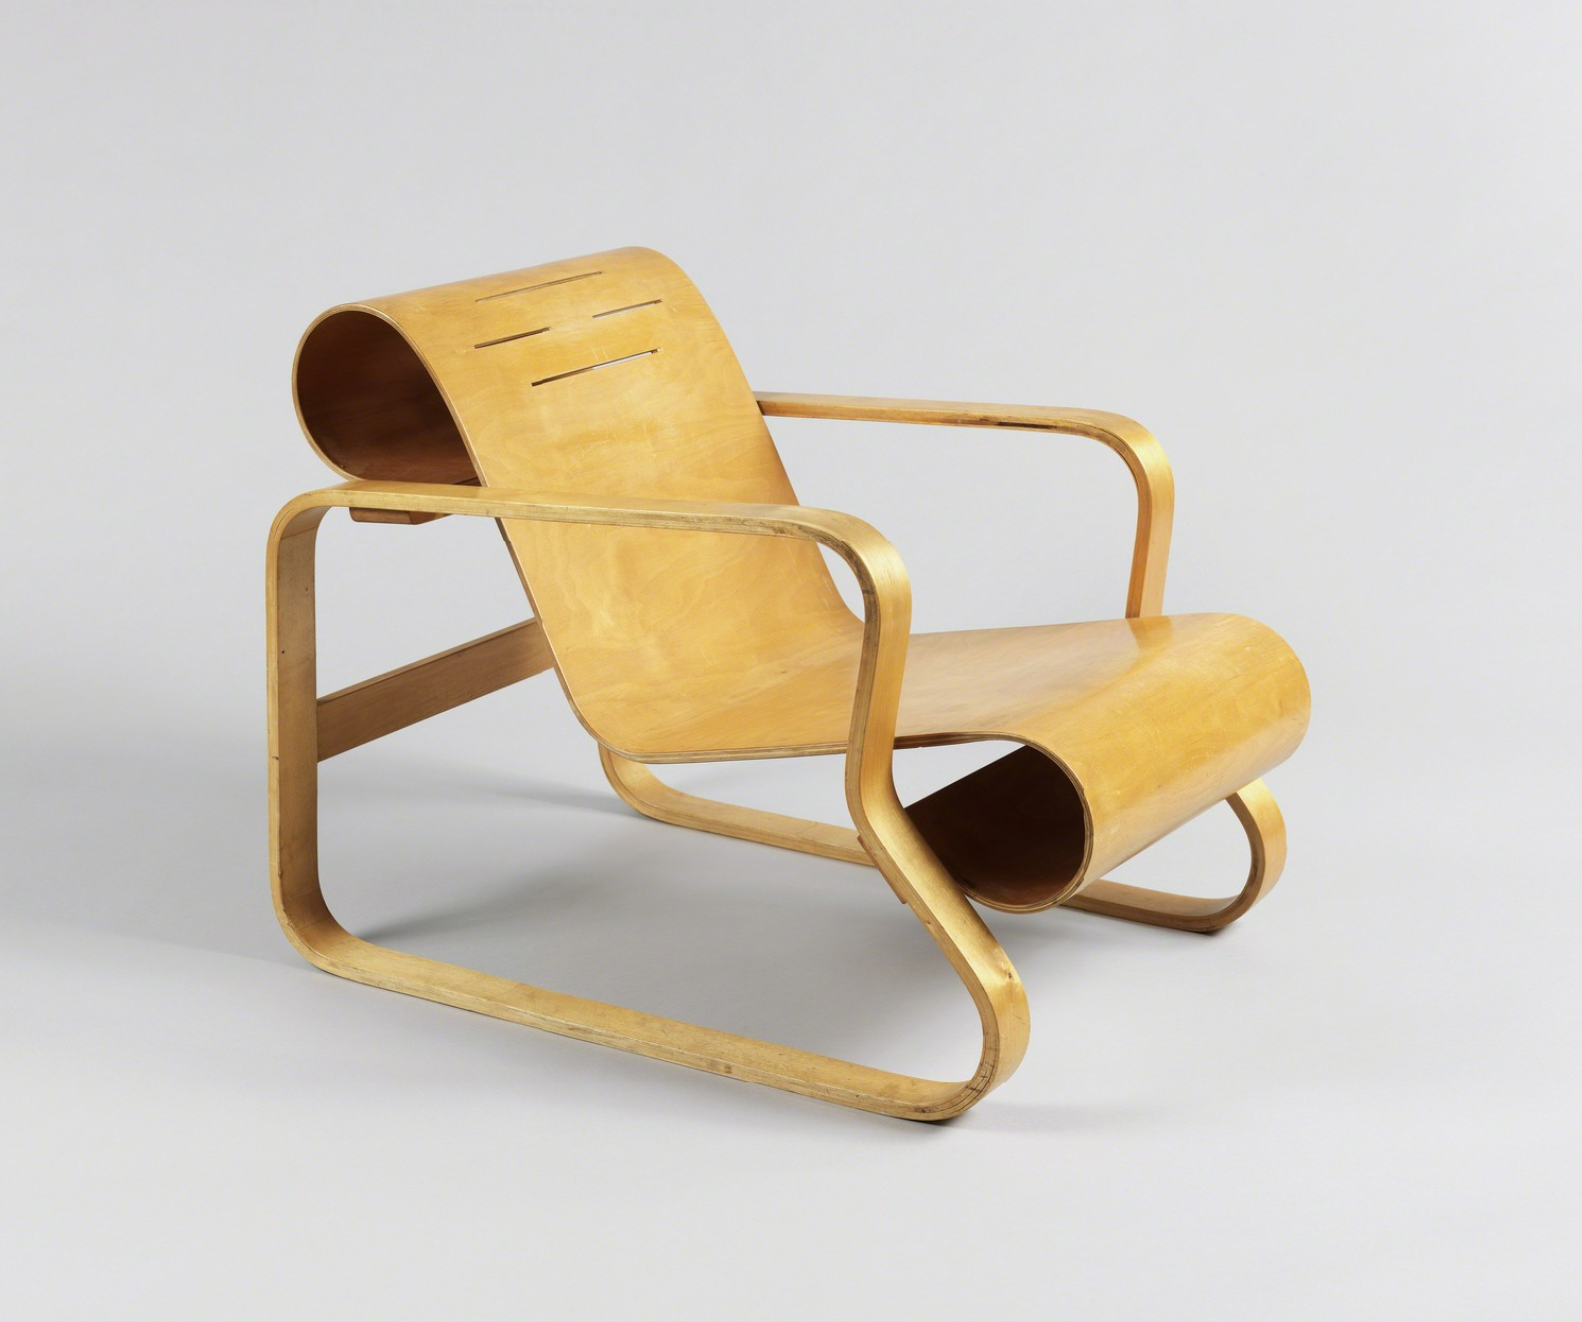 The evolution of plywood furniture